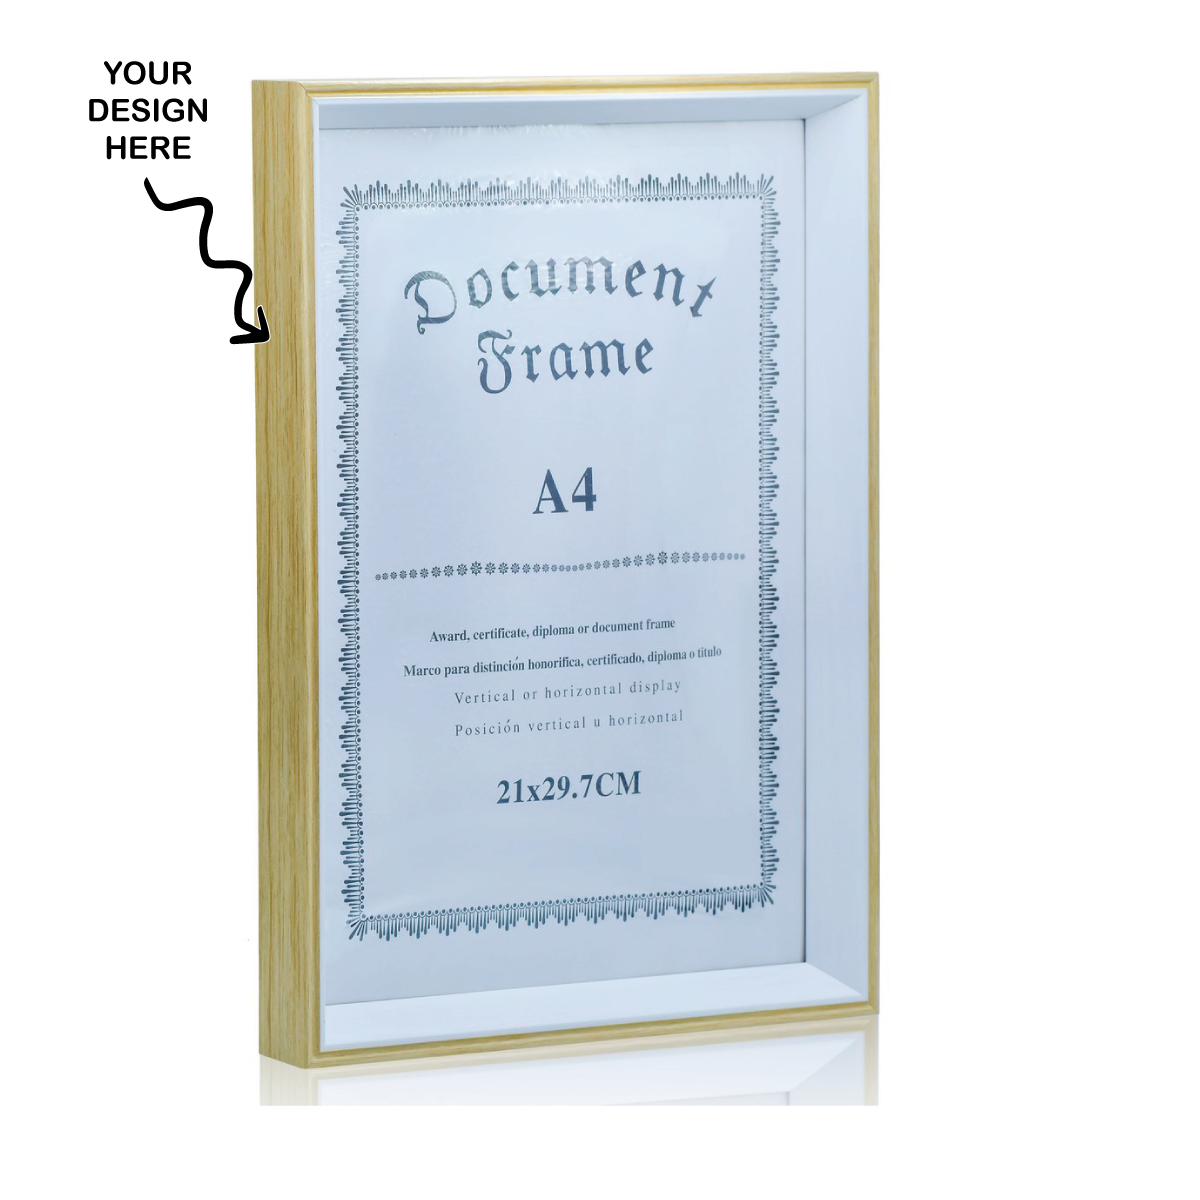 Personalized A4 Wooden Finish Photo Memoir, Document, cum Certificate Frame - For Corporate Gifting, Employee Appreciation, Office Desk, Farewell Gifts - JAPS5011A4